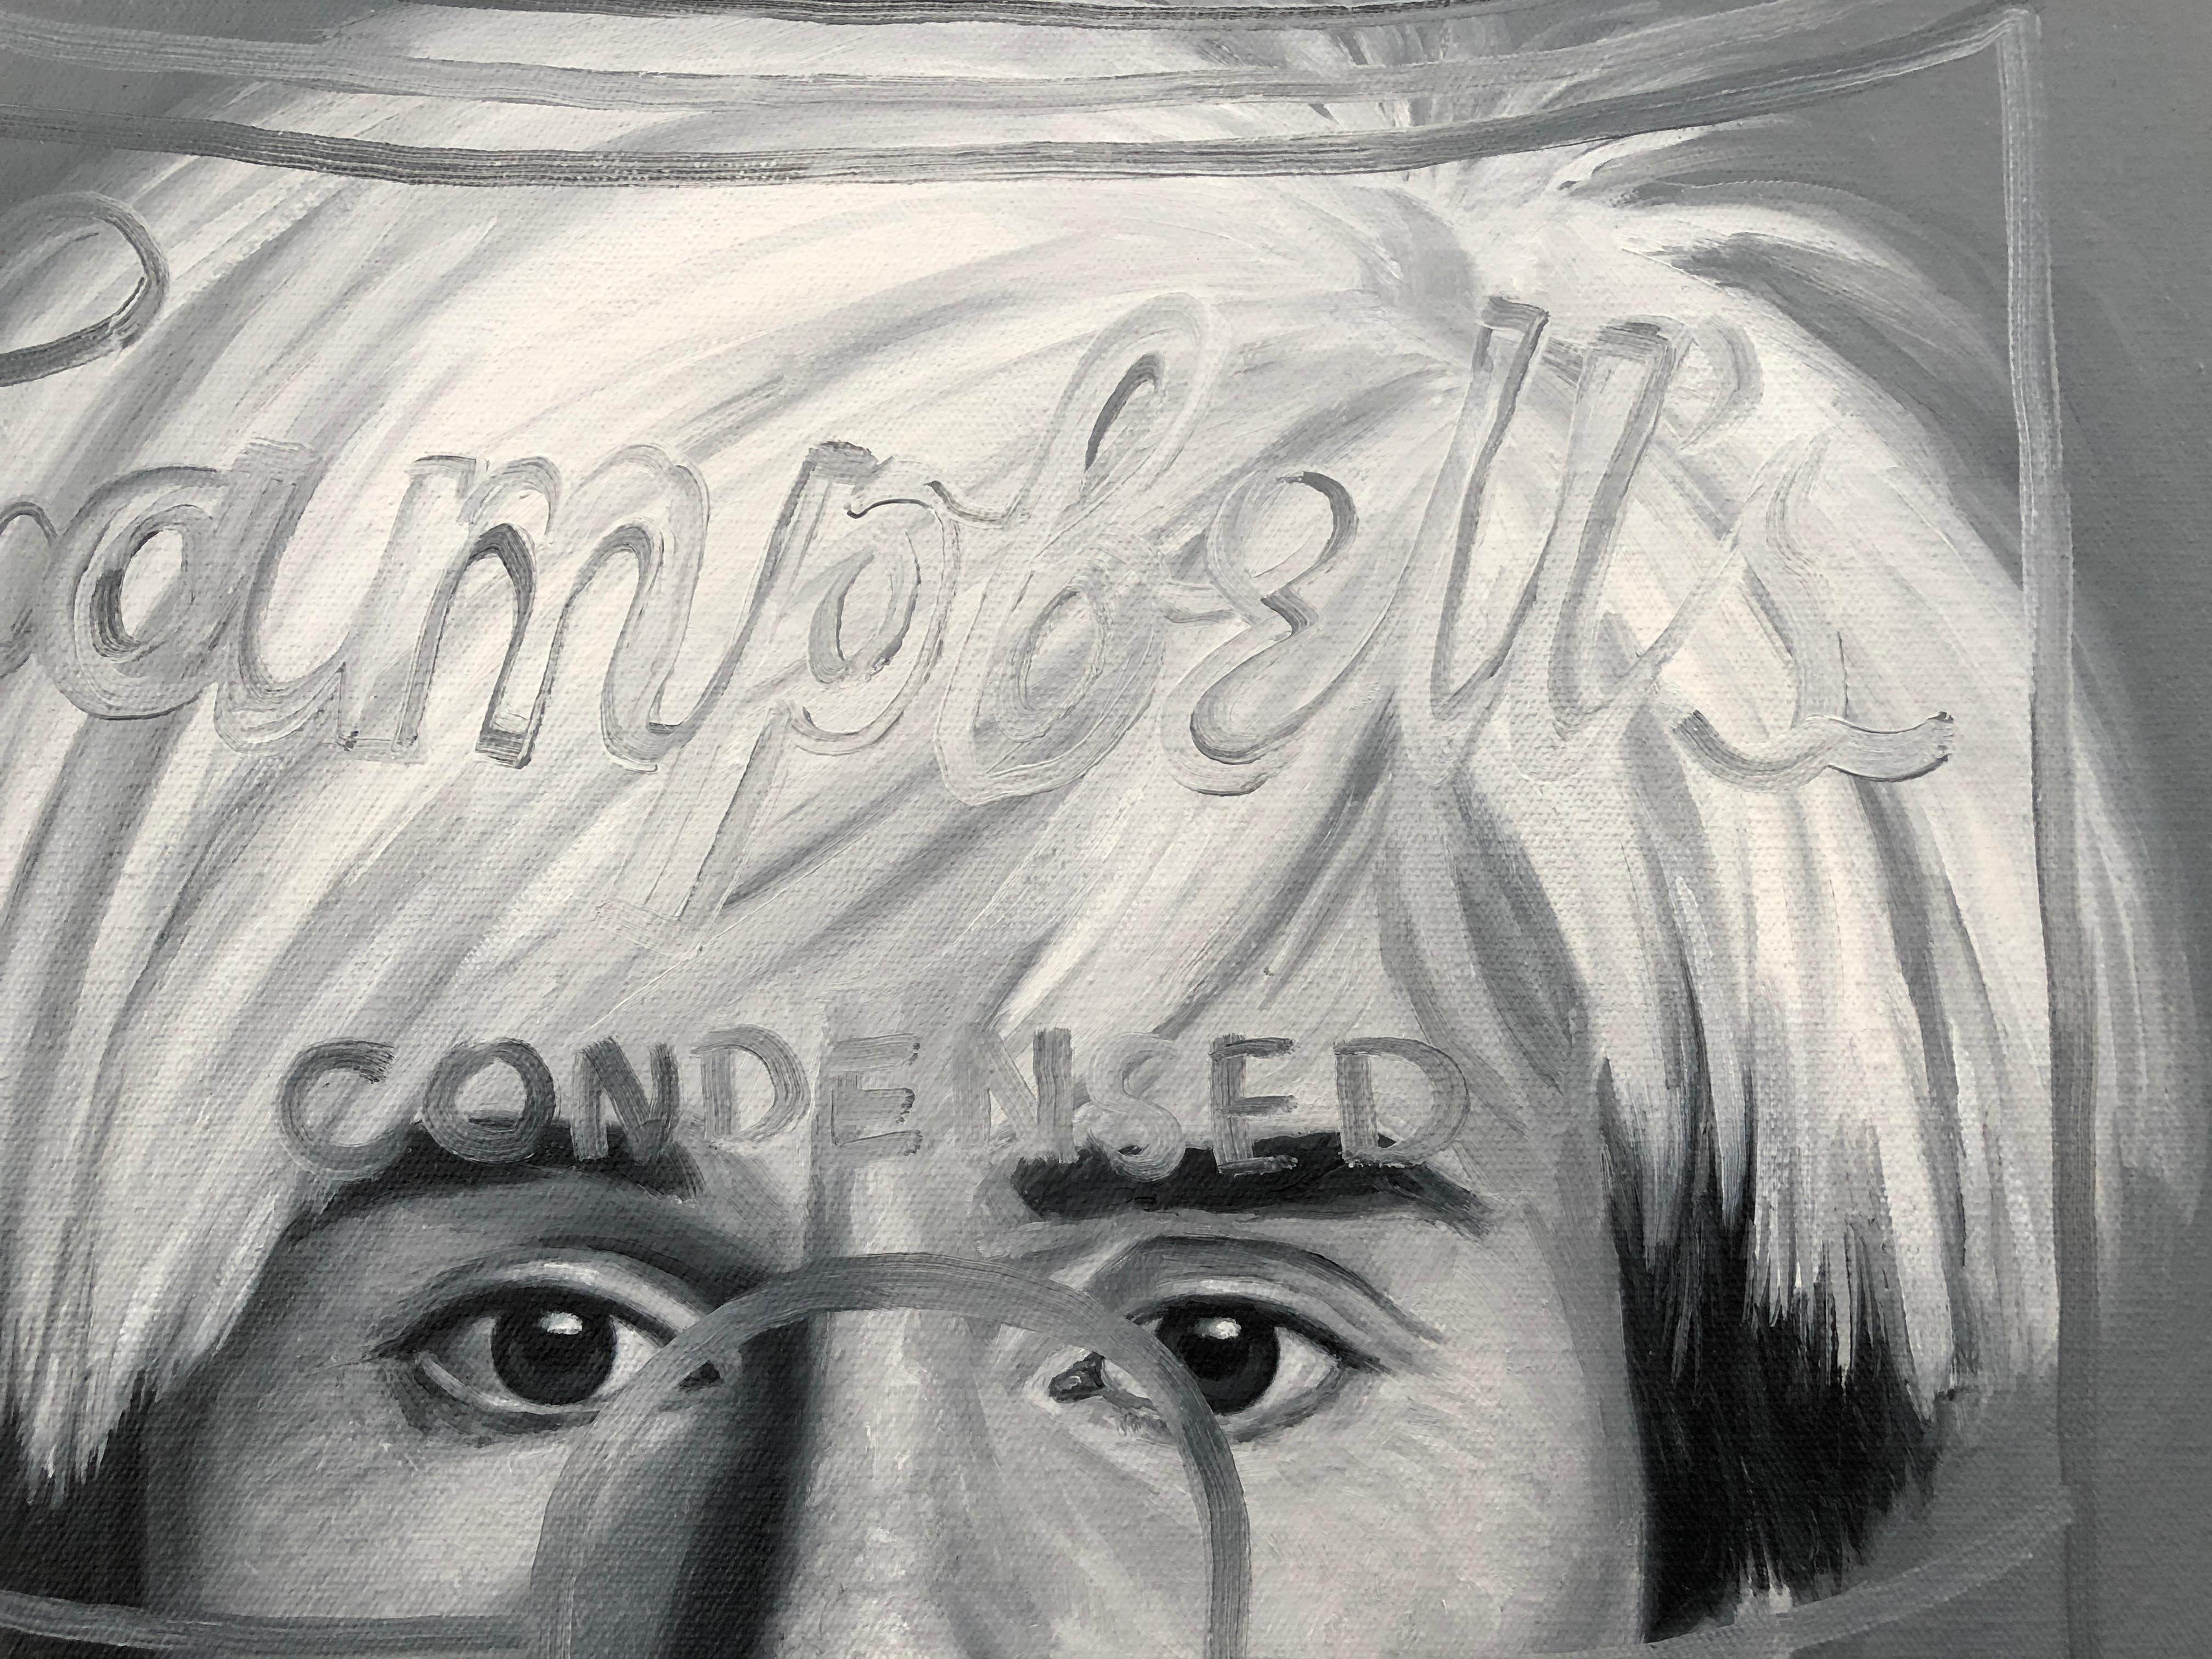 ANDRE VON MORISSE, Meeting Andy Warhol - The Inability of meeting someone famous im Angebot 6